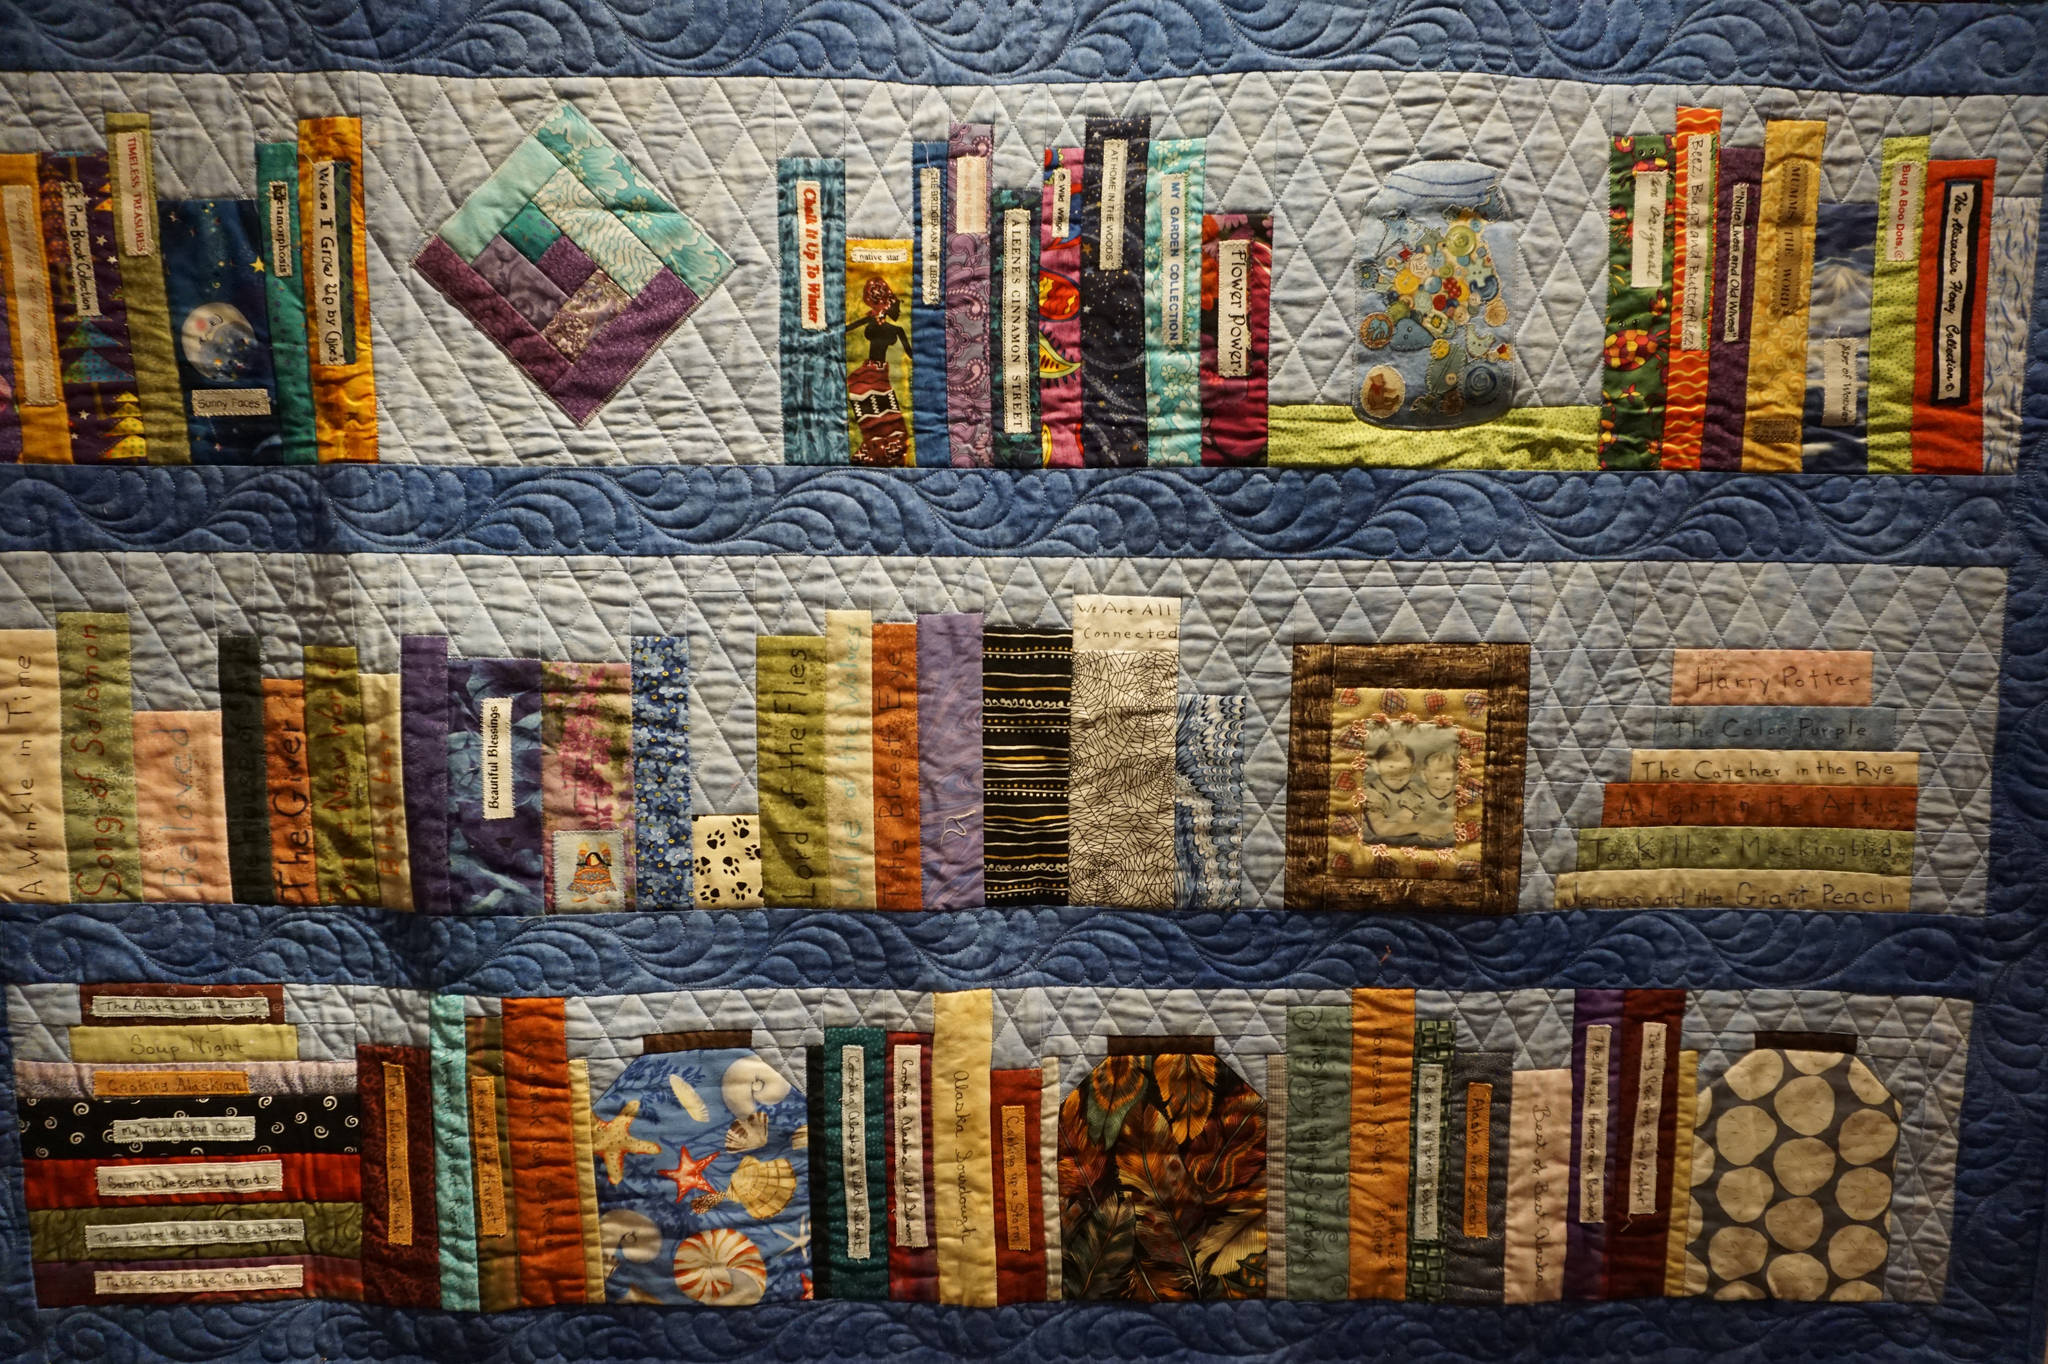 A close-up of Ruby Nofziger’s “On a Bookshelf” quilt, one of the works in the “9 Women / 9 Quilts” show that opened last Friday, Feb. 1, 2019, at the Homer Council on the Arts, in Homer, Alaska. Each panel or row of books was done by a different quilter. (Photo by Michael Armstrong/Homer News)